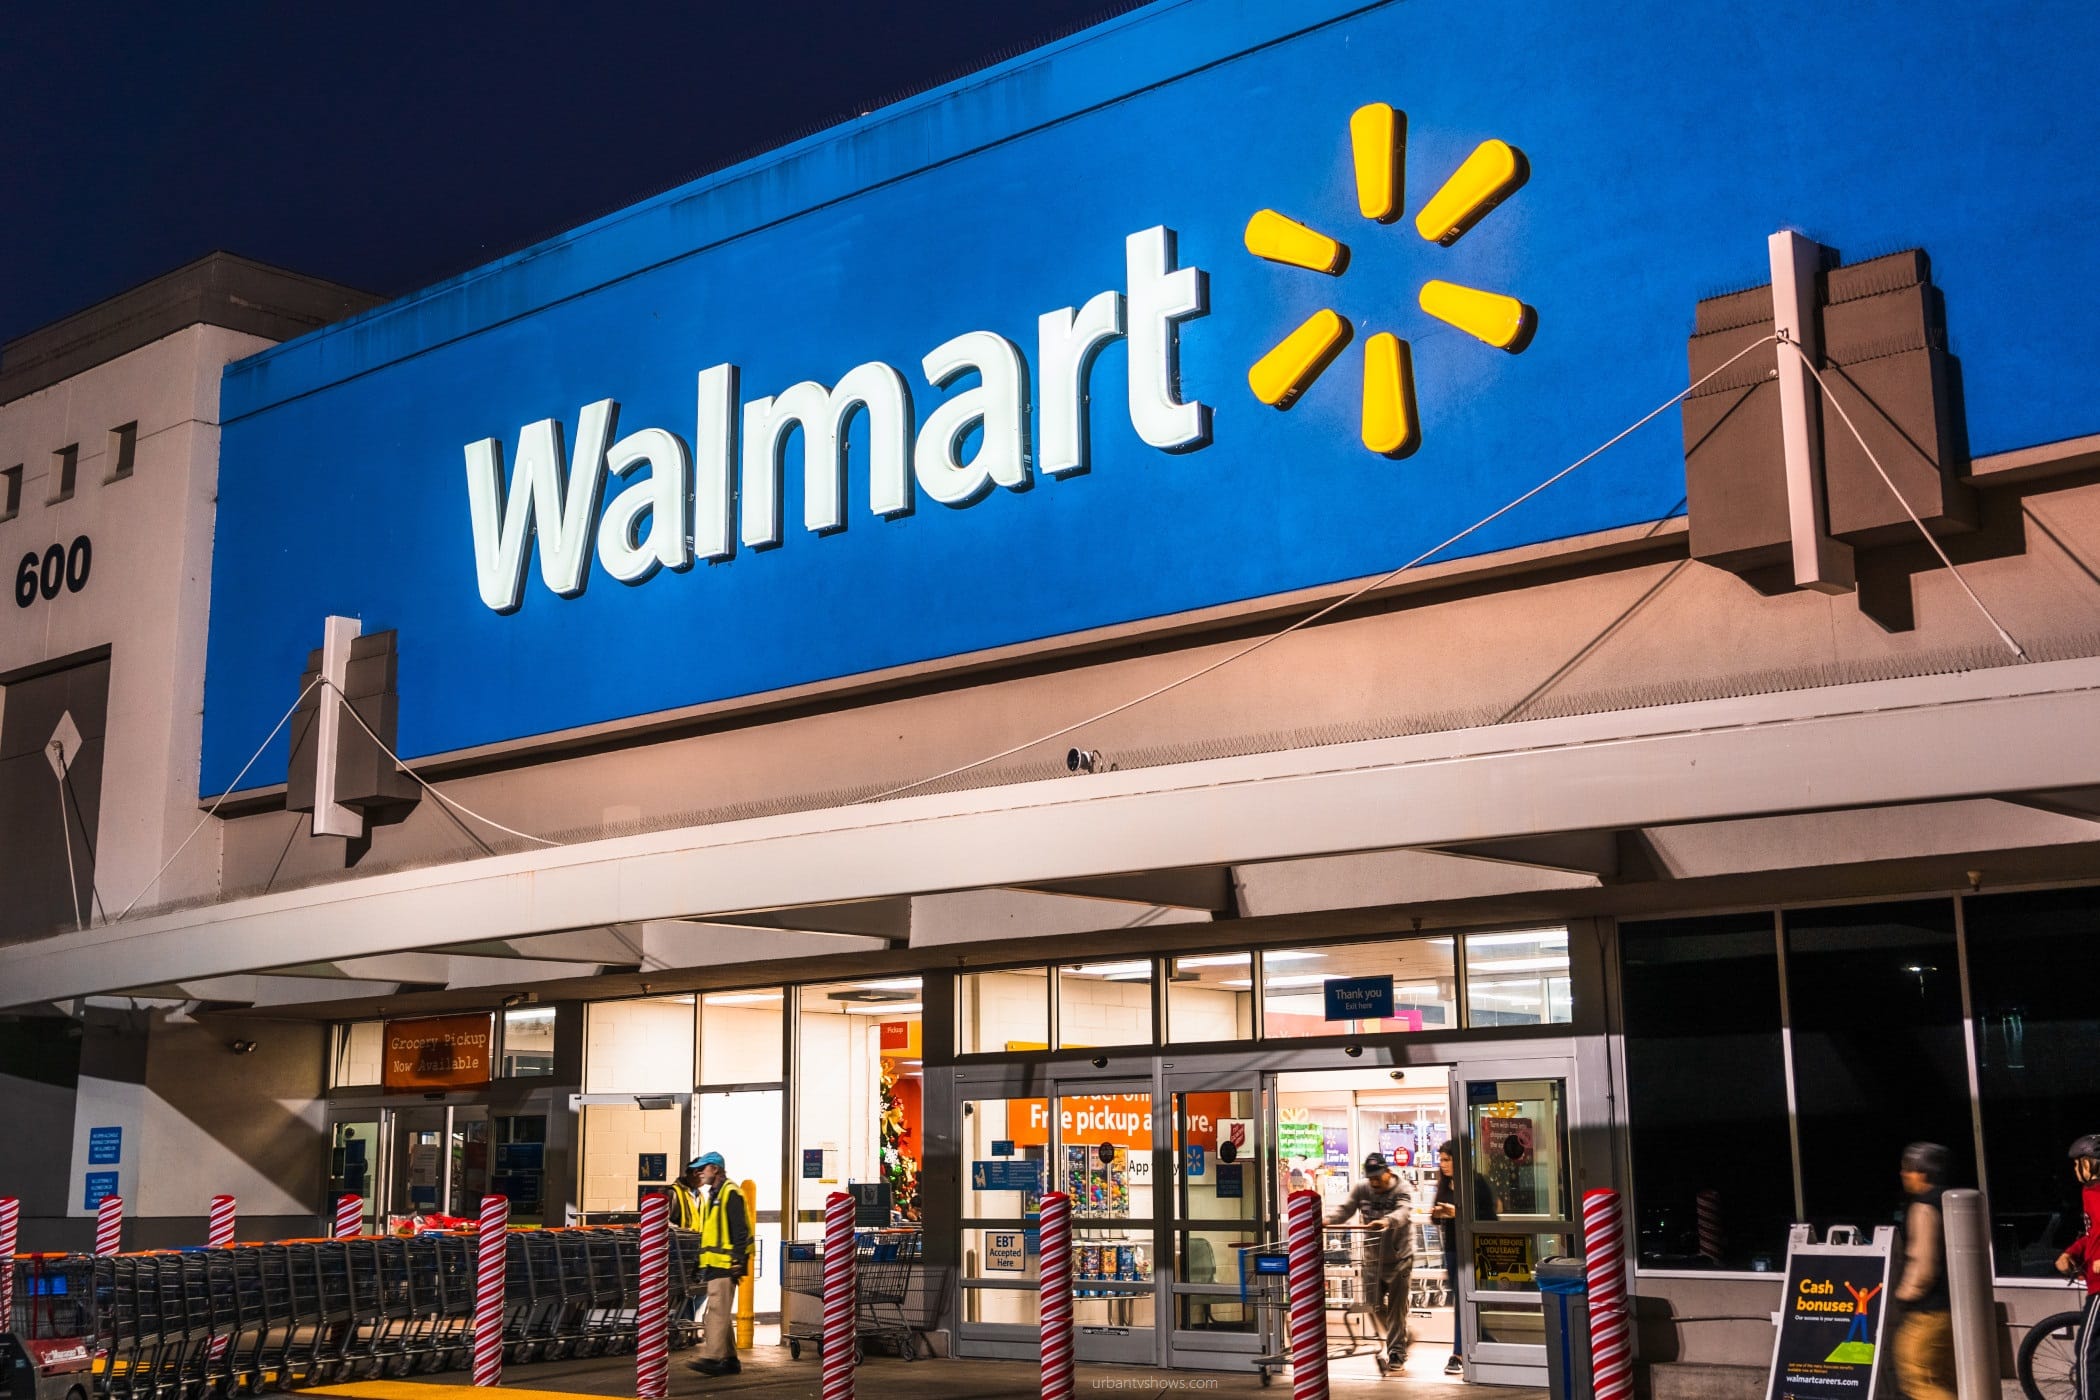 Walmart Overnight Jobs – Requirement And Application Process